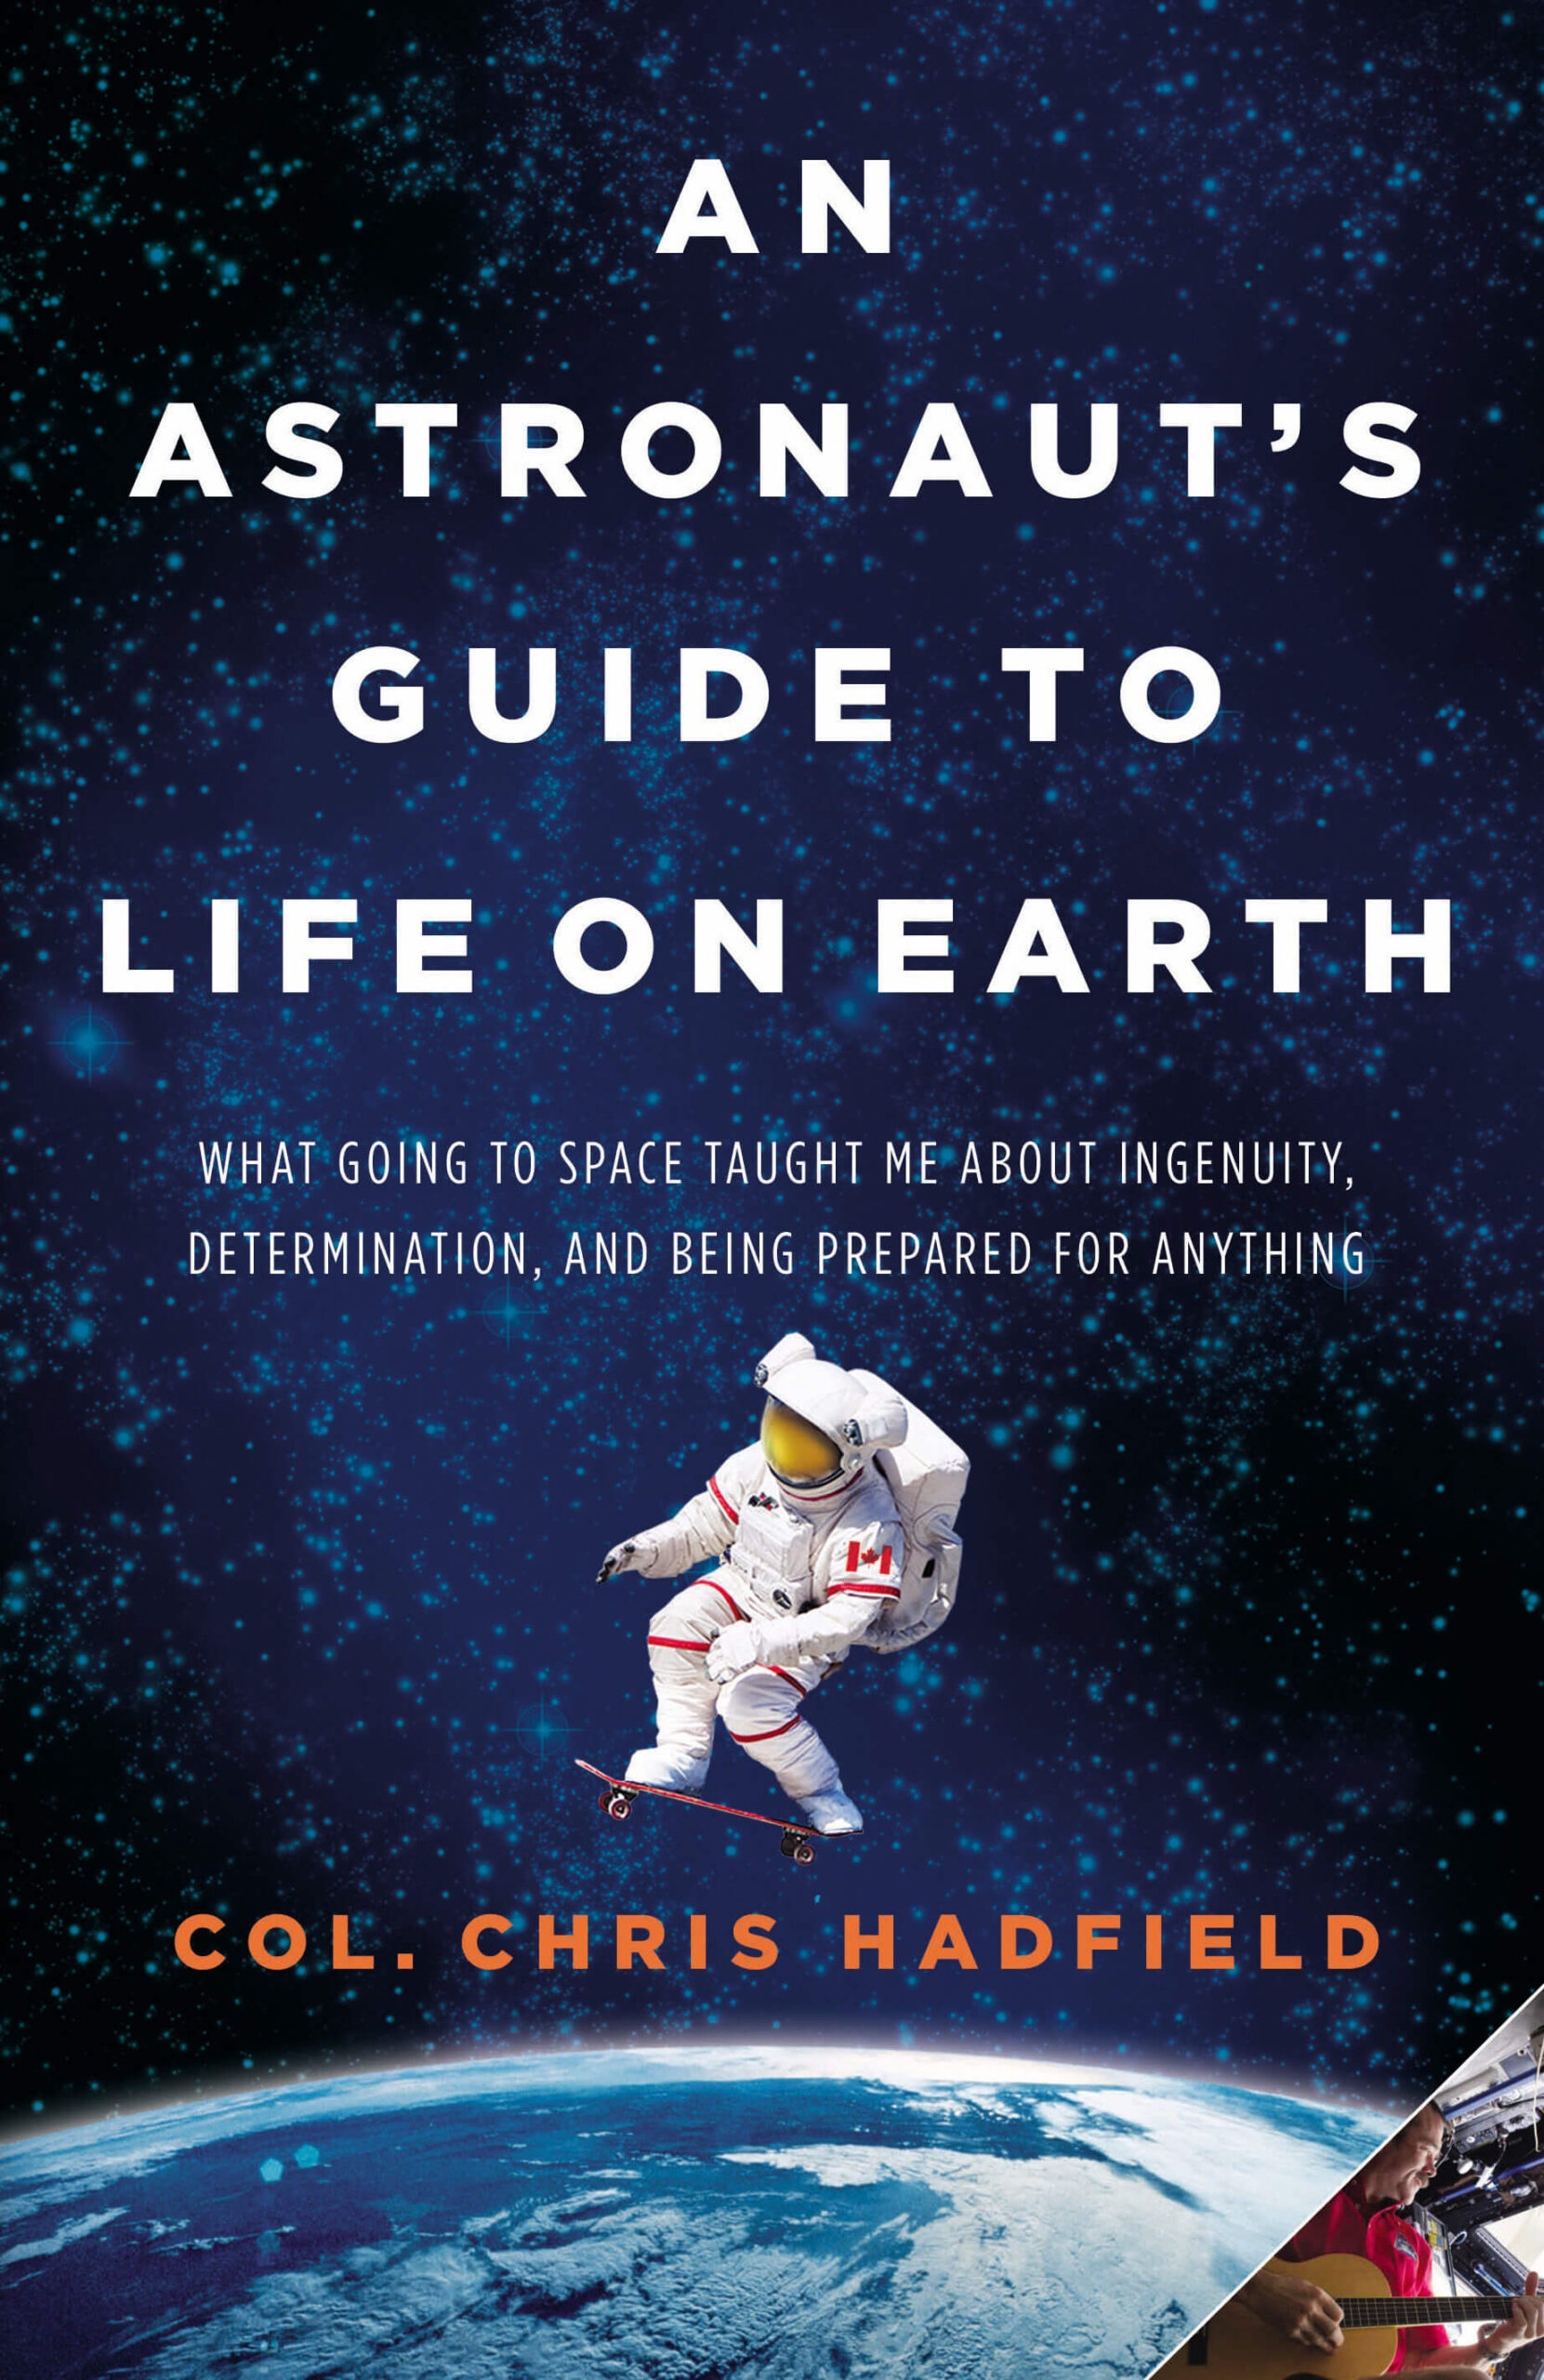 Book cover art from Chris Hadfield's 'An Astronaut's Guide to Life on Earth' - US Version